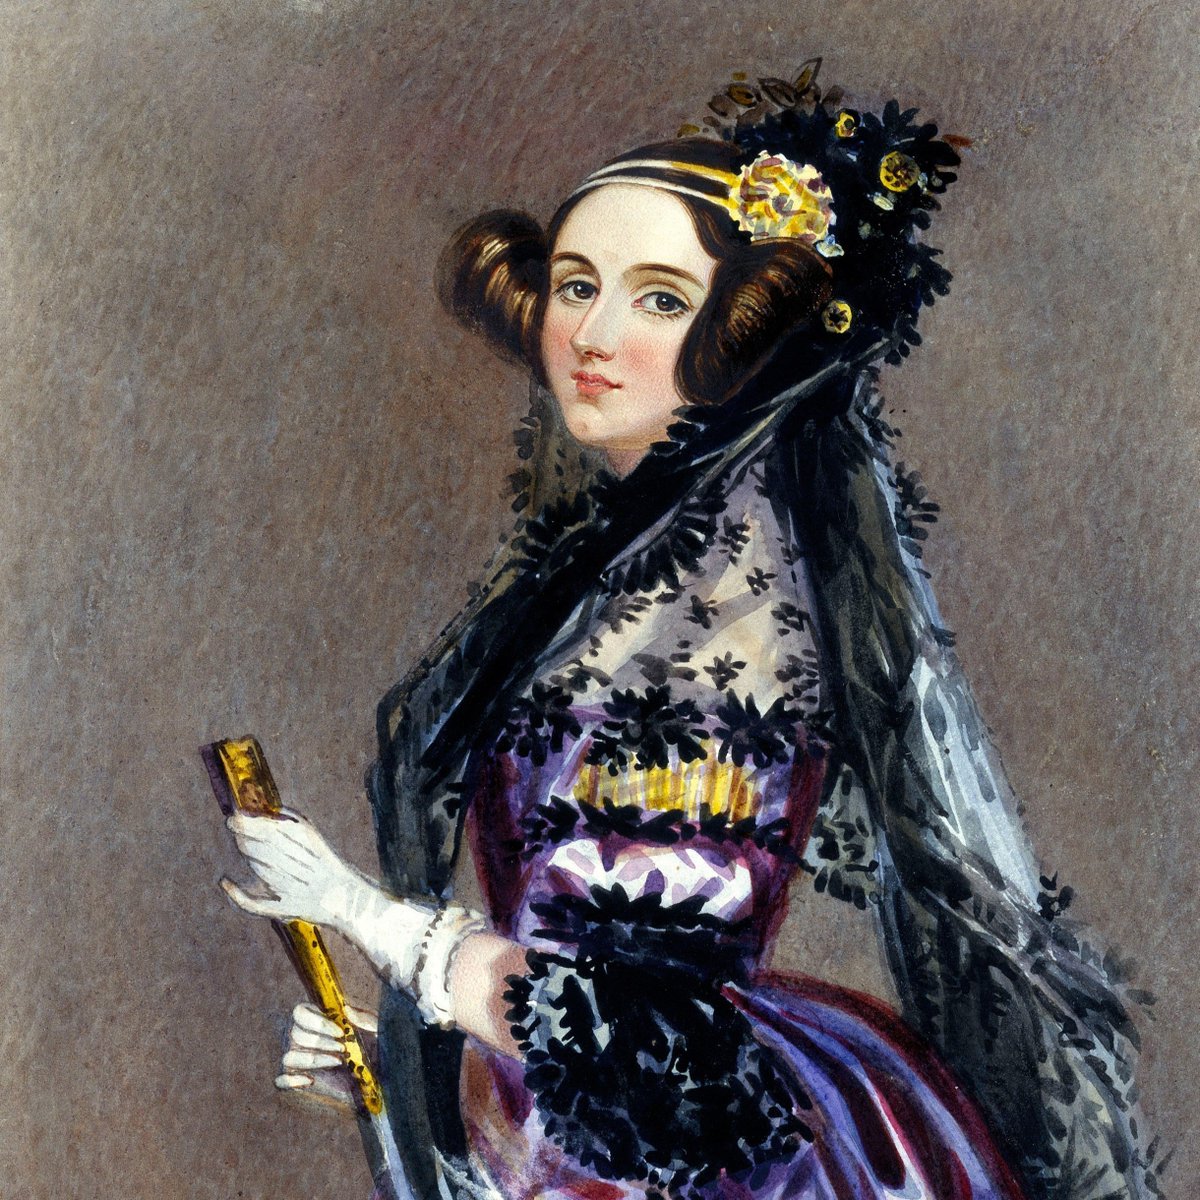 Hey, ever heard of #AdaLovelace? You totally need to 😉. She's an original tech visionary and is known as the first computer programmer, thanks to her work with Charles Babbage on the Analytical Engine. She proves that women have always been at the forefront of tech. 👩‍💻 🙌